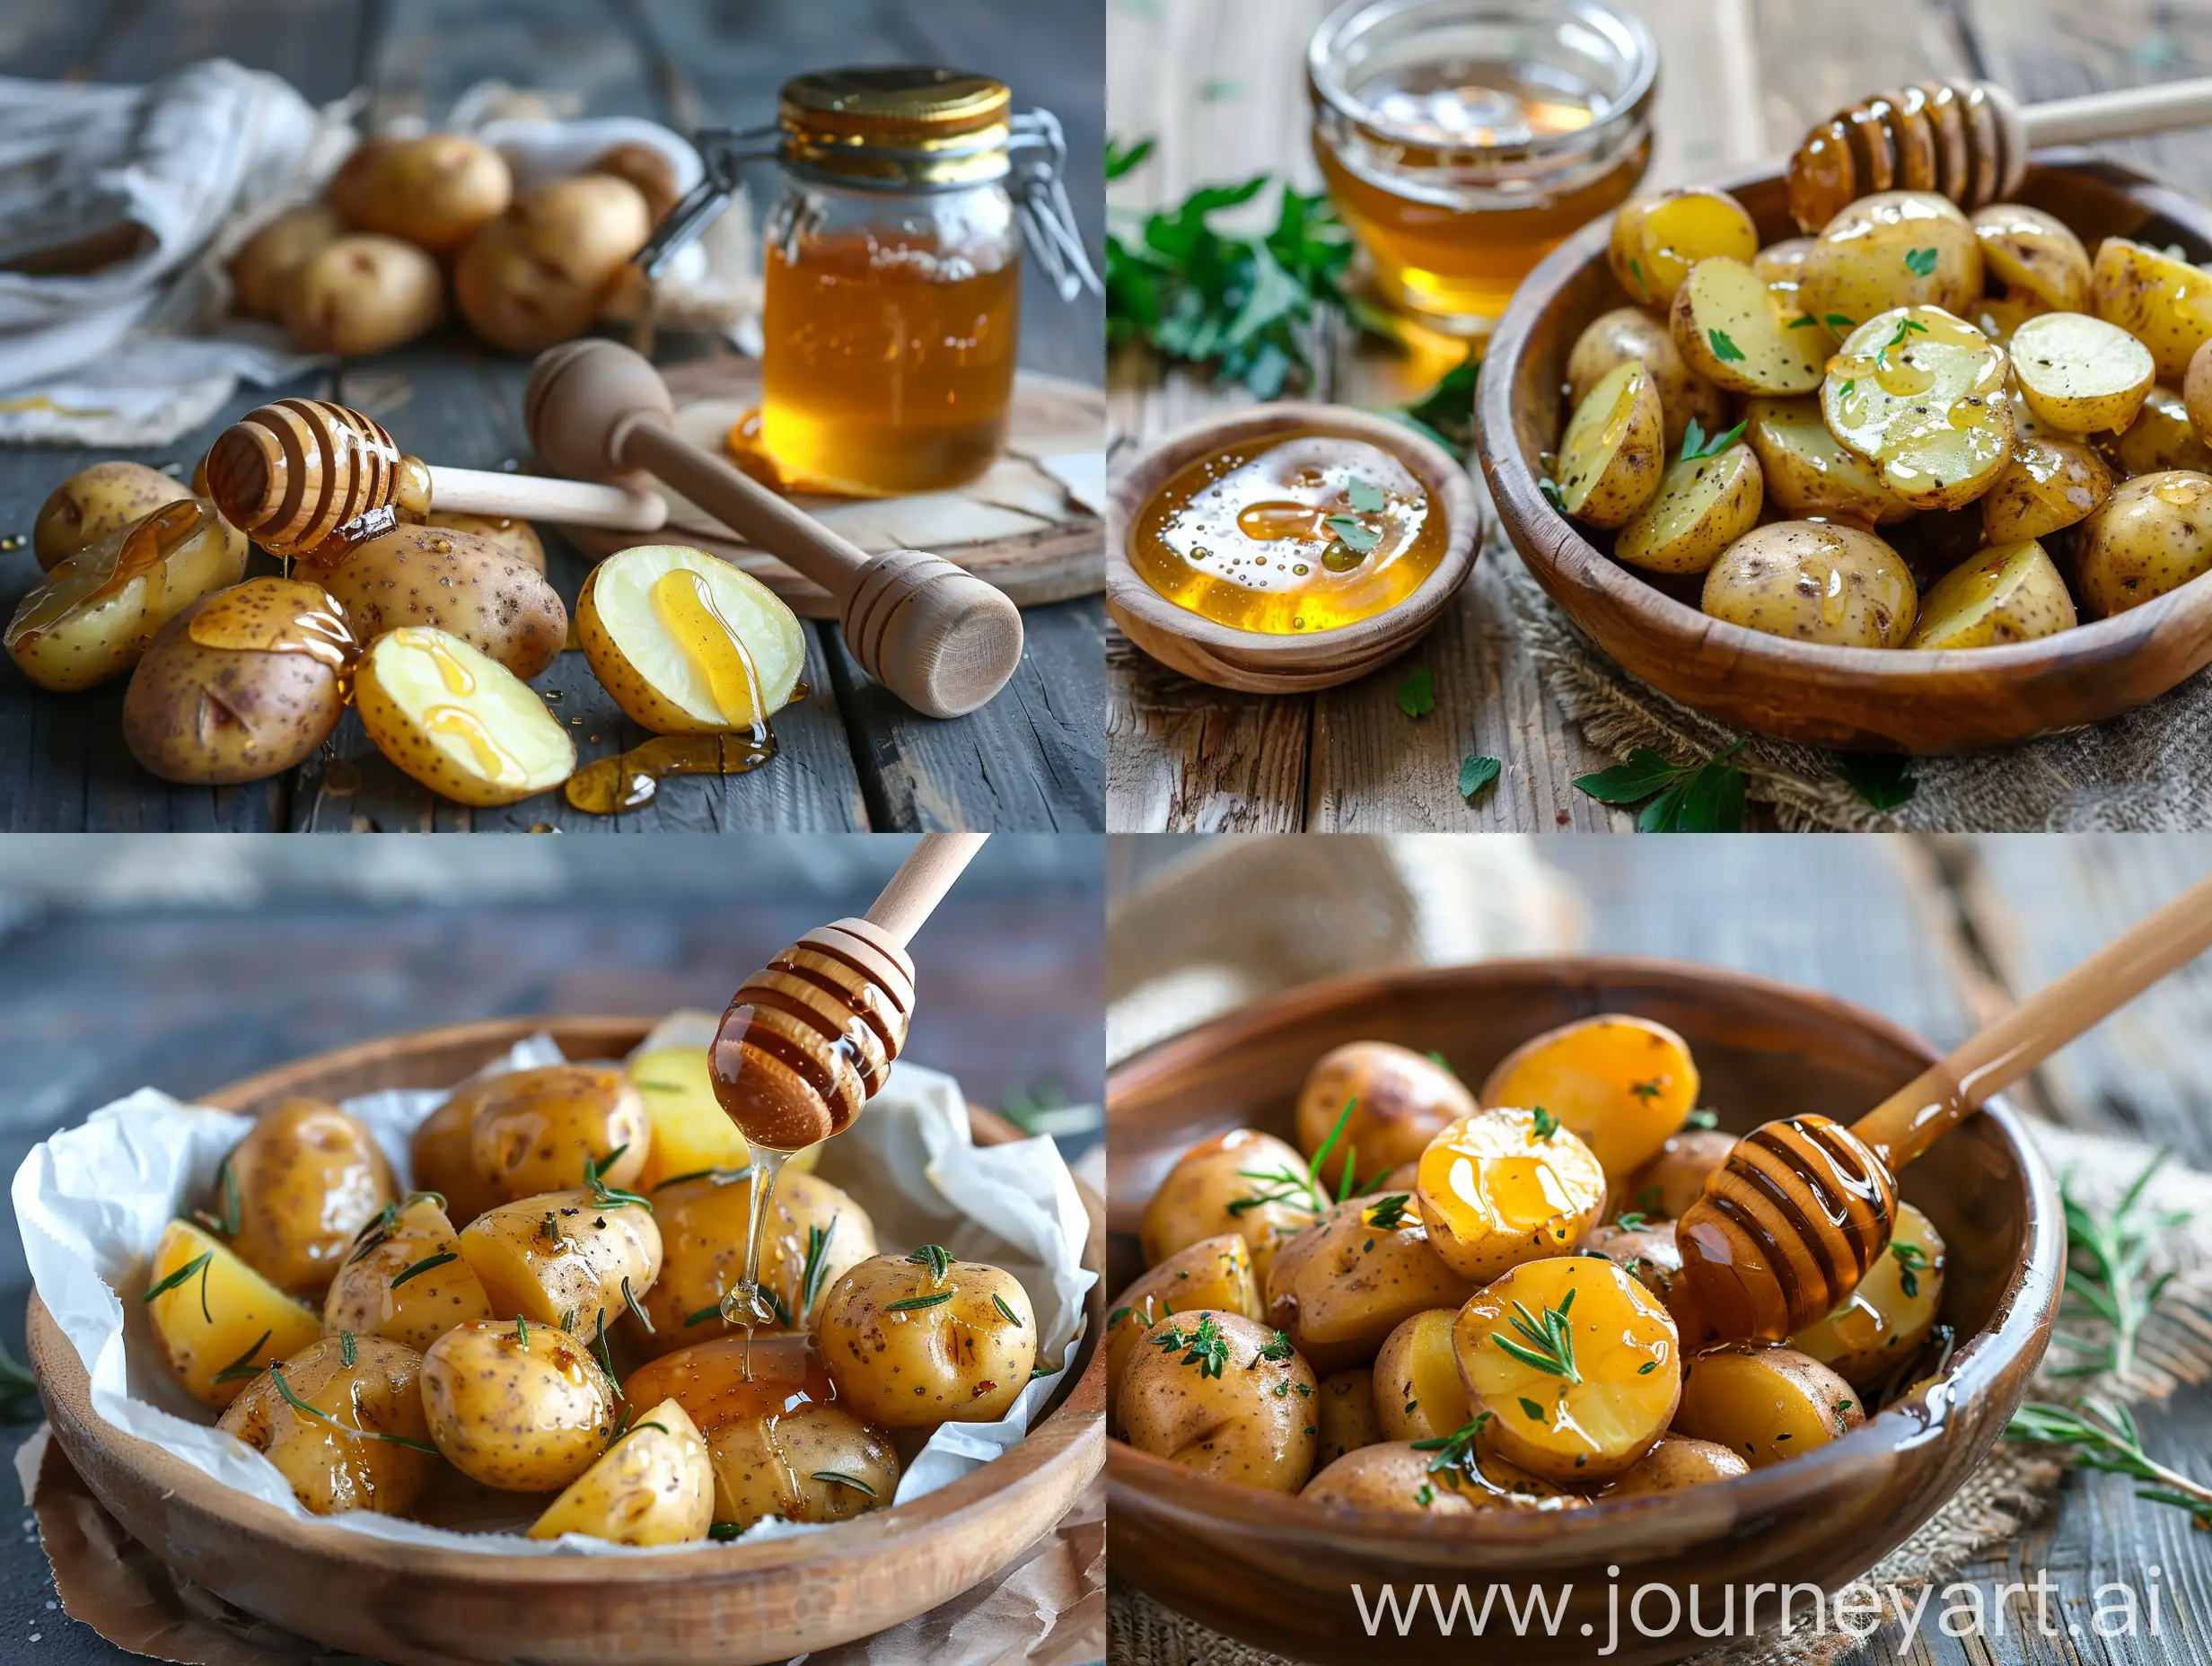 Attractive advertising photo of potatoes with honey